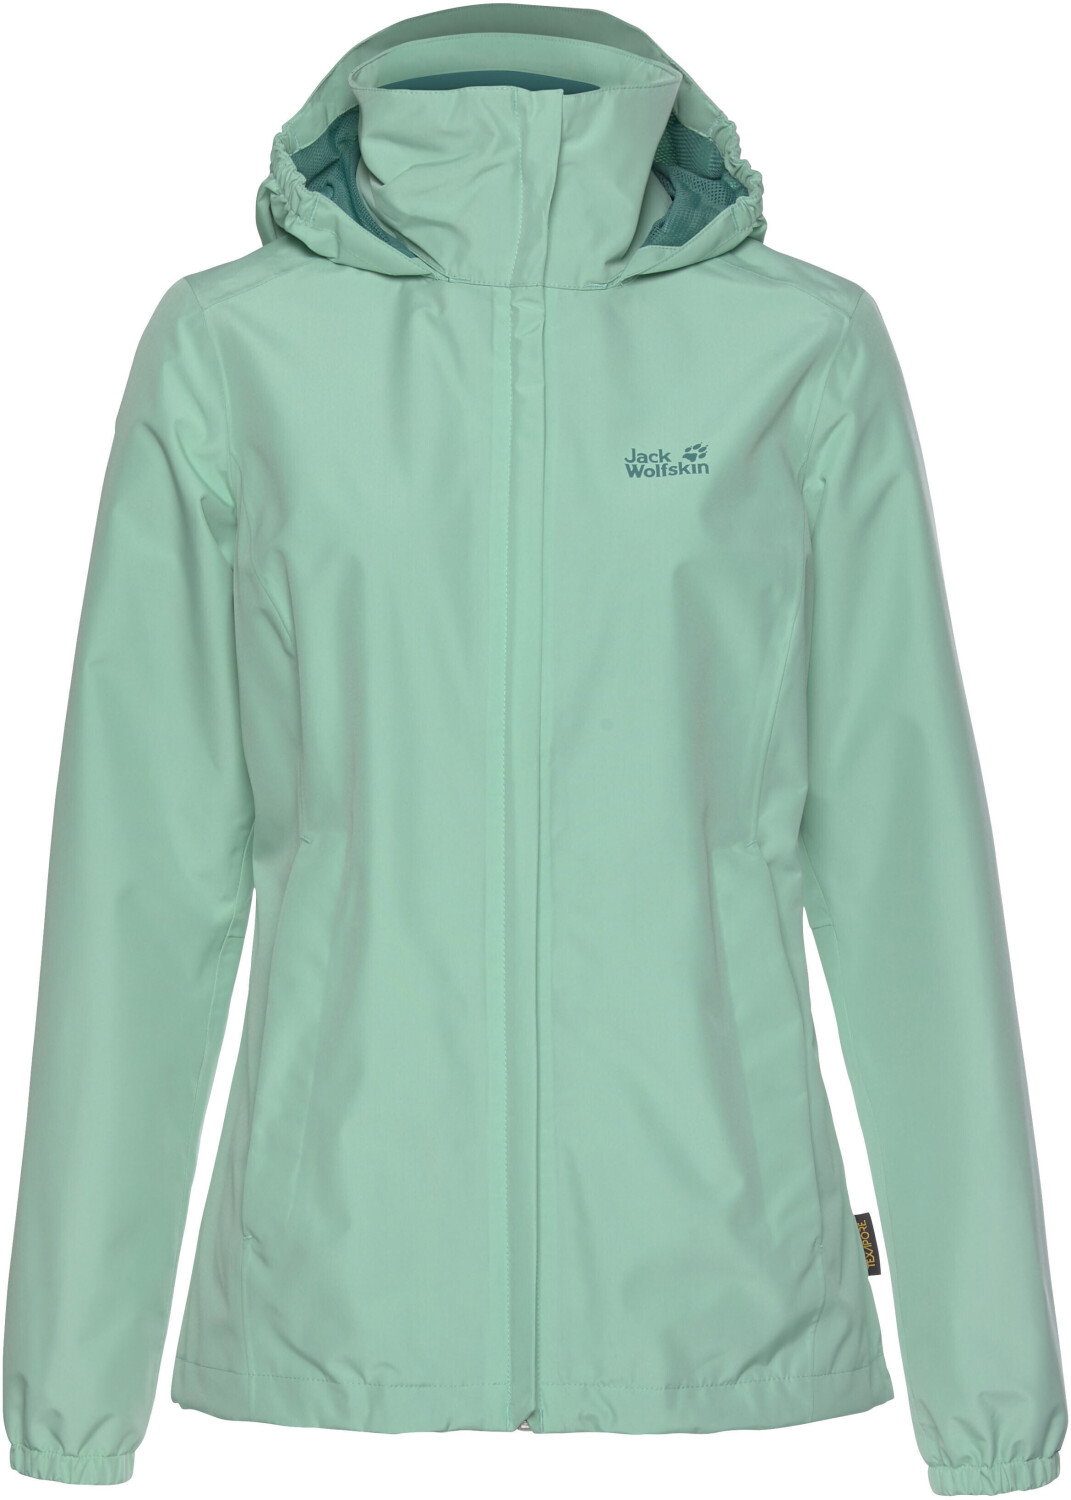 Jack Wolfskin Stormy Point Jacket W pacific green ab 52,99